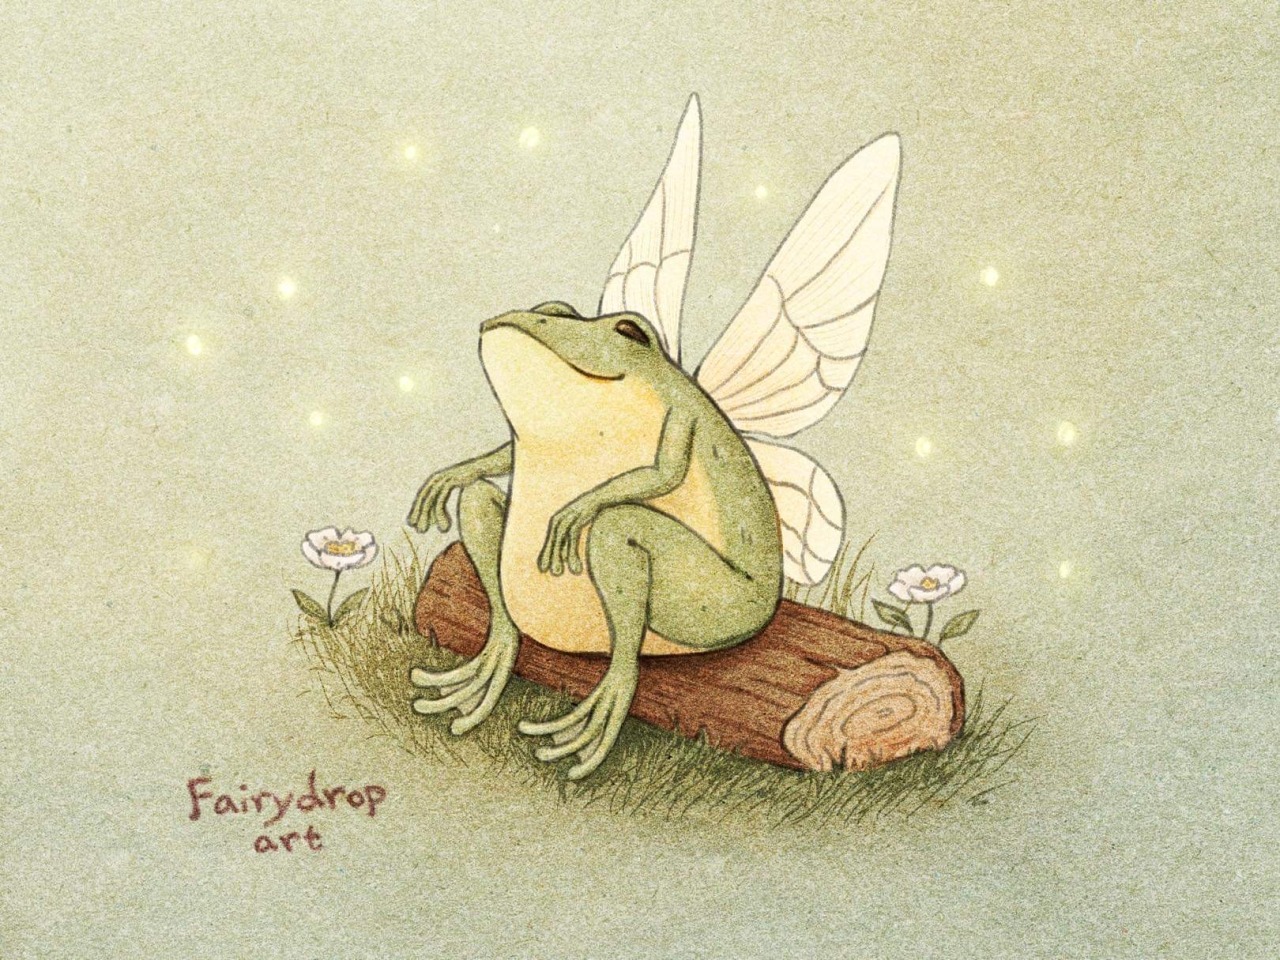 Art Blog — Just a fairly frog, doing fairy frog things